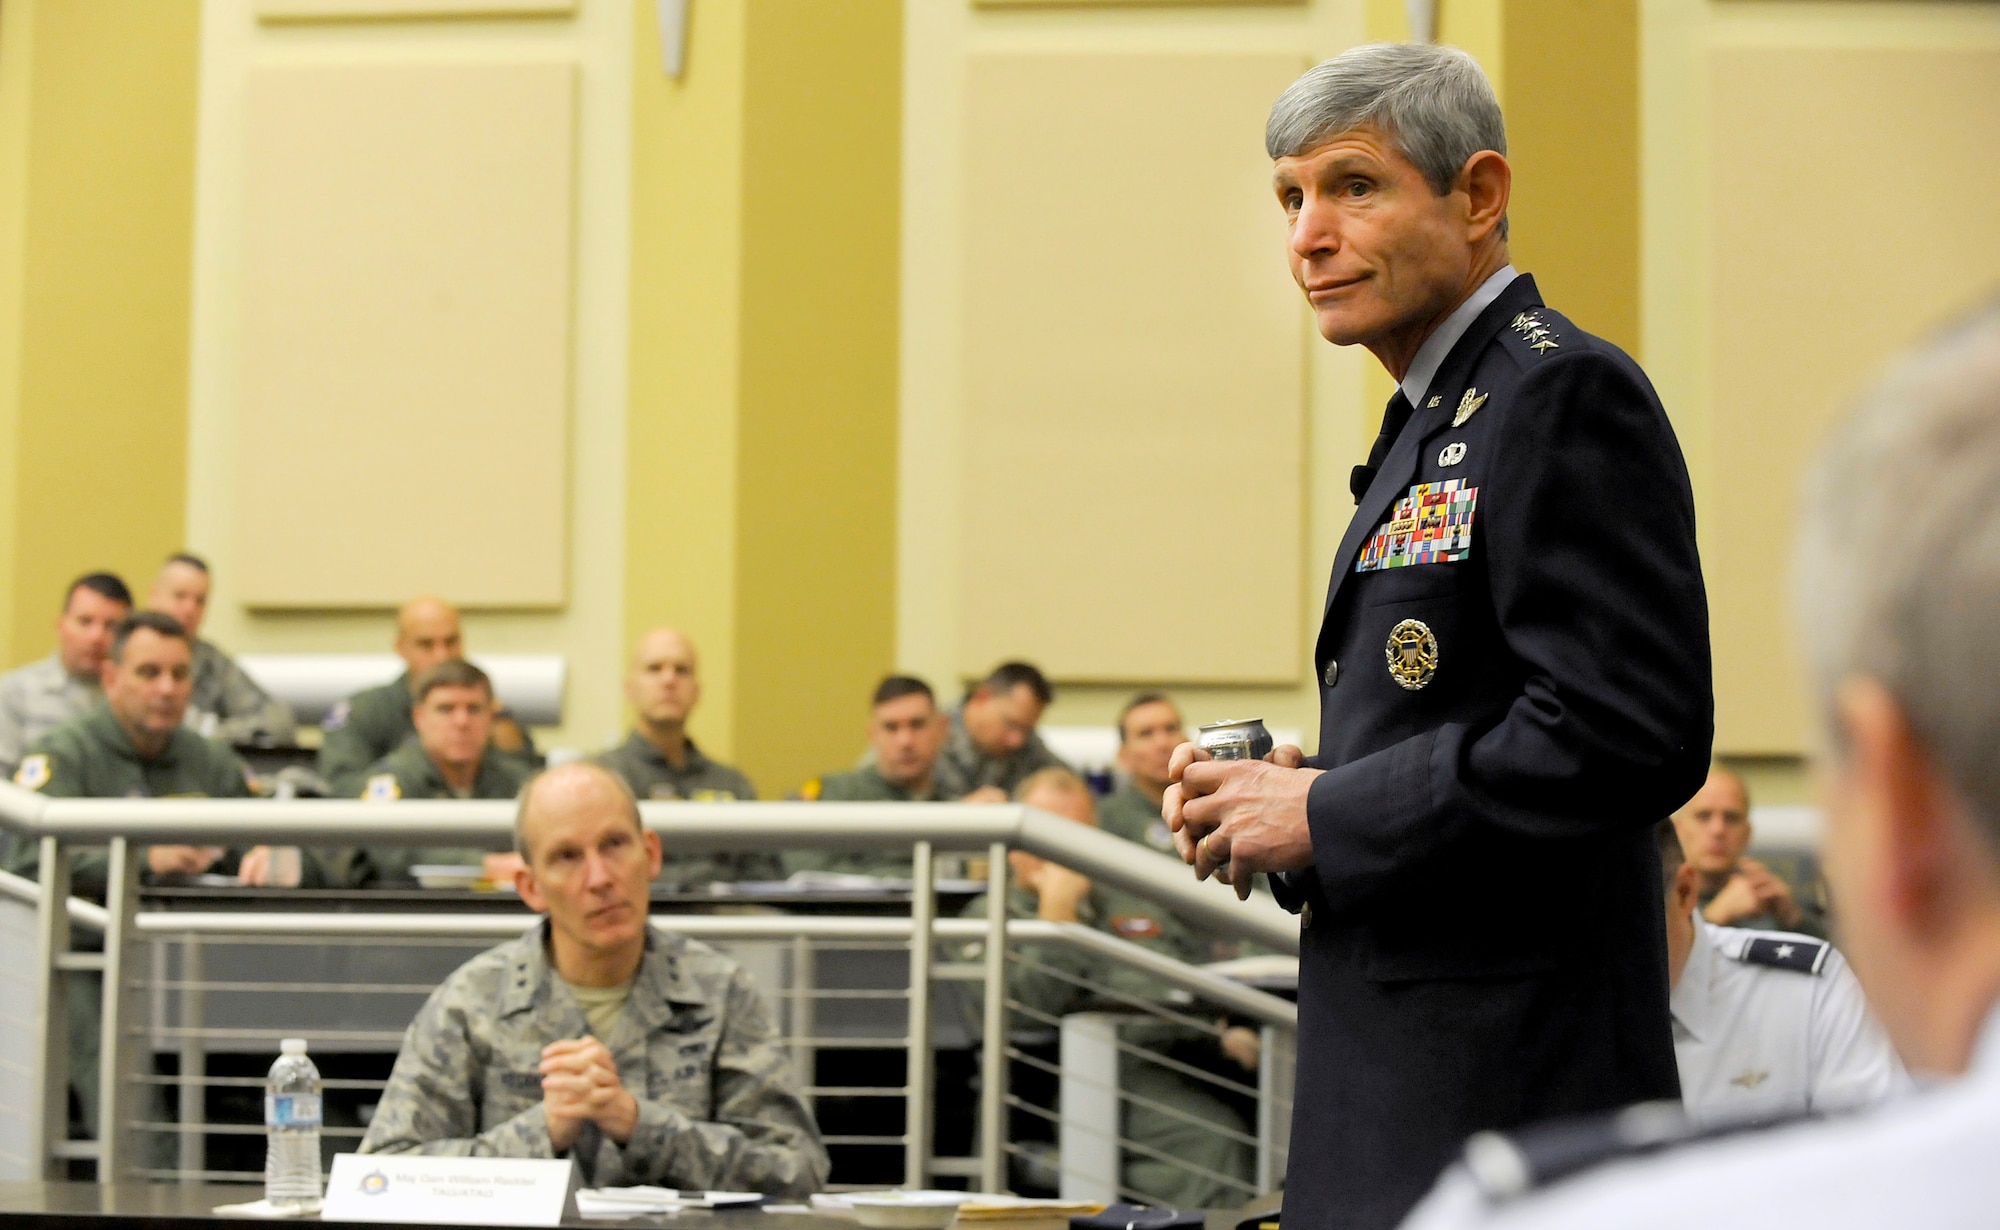 Air Force Chief of Staff Gen. Norton Schwartz speaks to attendees at the Total Force Integration Summit at Joint Base Andrews, Md., April 2, 2012.  (U.S. Air Force photo/Scott M. Ash)